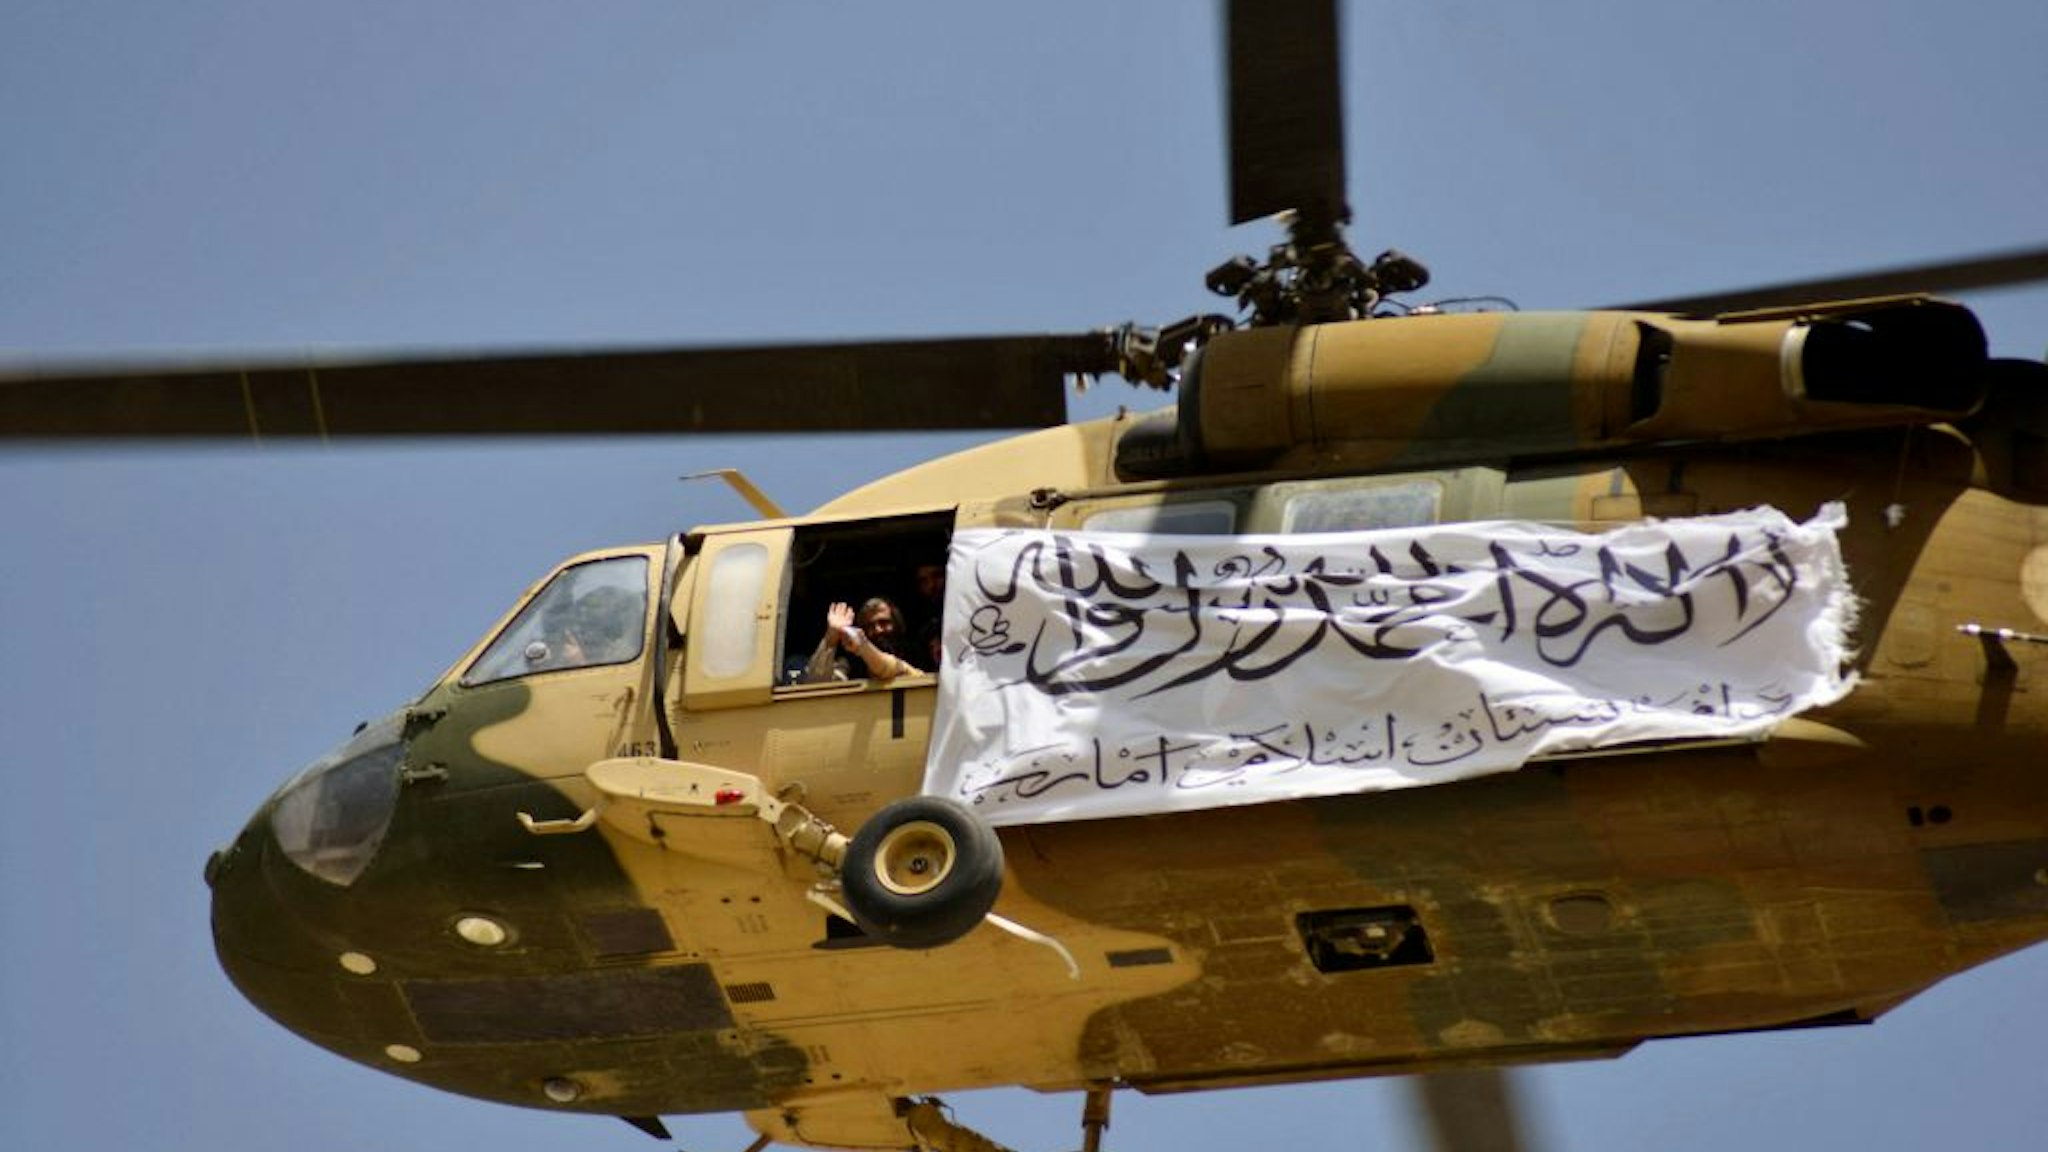 TOPSHOT - A helicopter displaying a Taliban flag flies above Taliban supporters gathered to celebrate the US withdrawal of all its troops out of Afghanistan, in Kandahar on September 1, 2021 following the Talibans military takeover of the country. (Photo by JAVED TANVEER / AFP) (Photo by JAVED TANVEER/AFP via Getty Images)